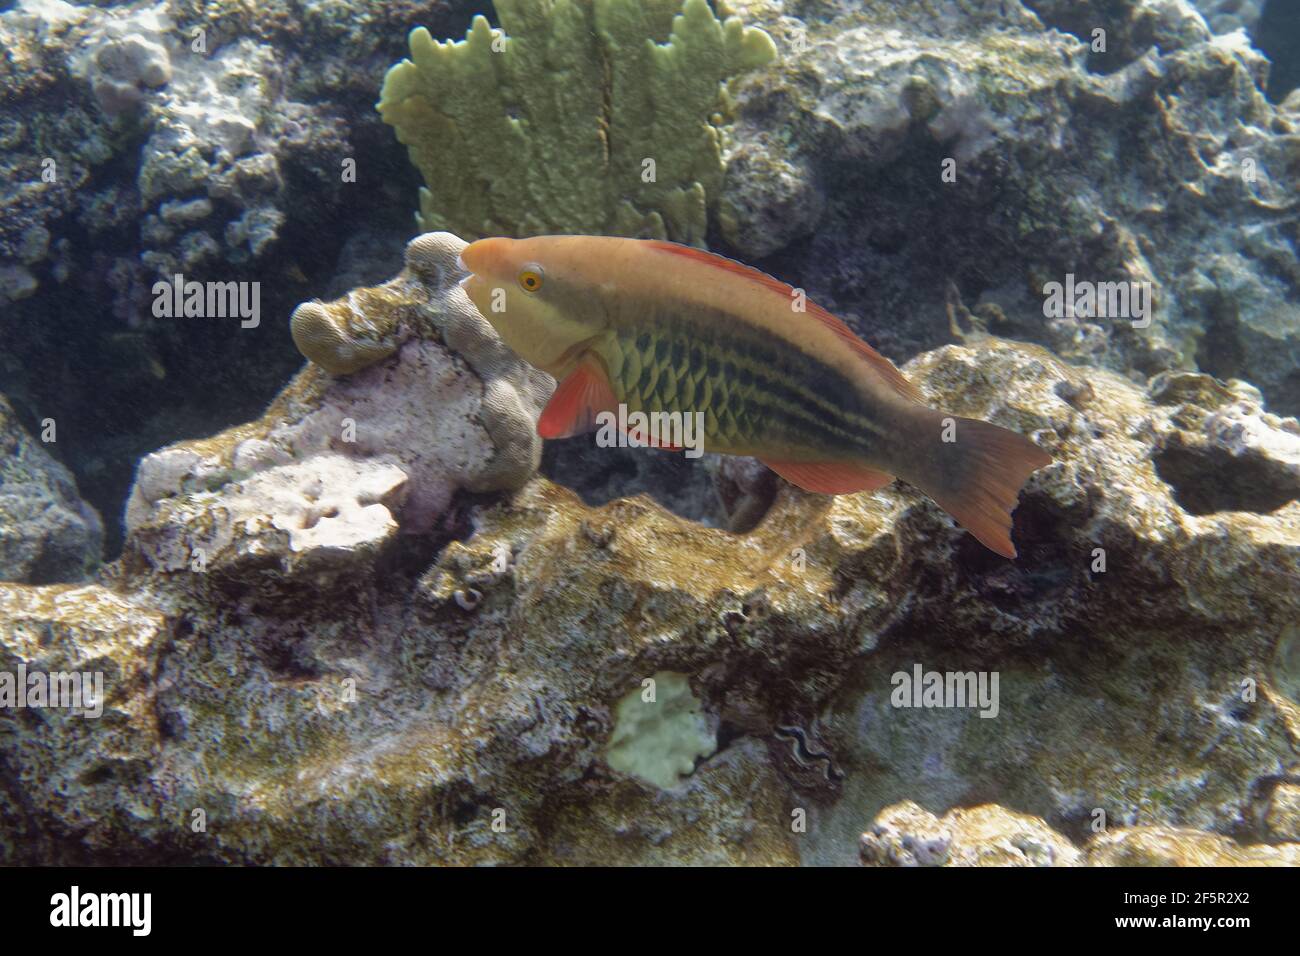 Female Bridled parrotfish or Sixband parrotfish (Scarus frenatus) in Red Sea Stock Photo